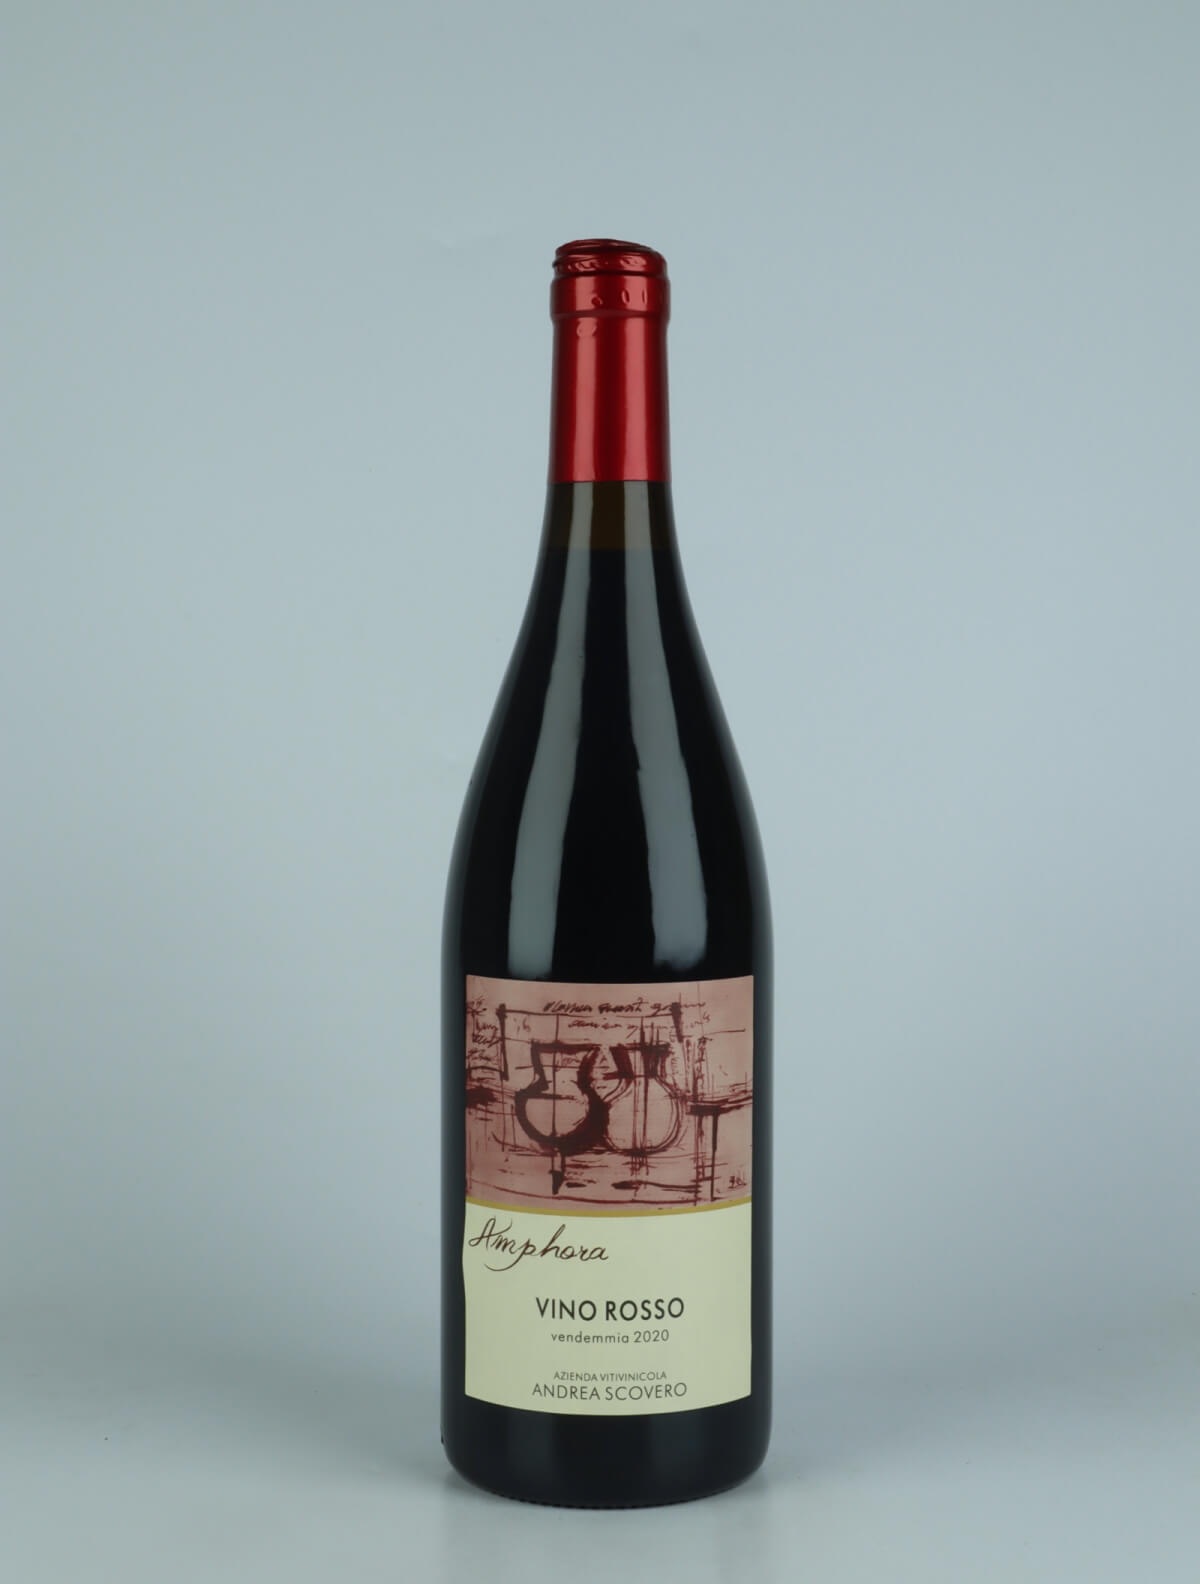 A bottle 2020 Vino Rosso - Amphora Red wine from Andrea Scovero, Piedmont in Italy